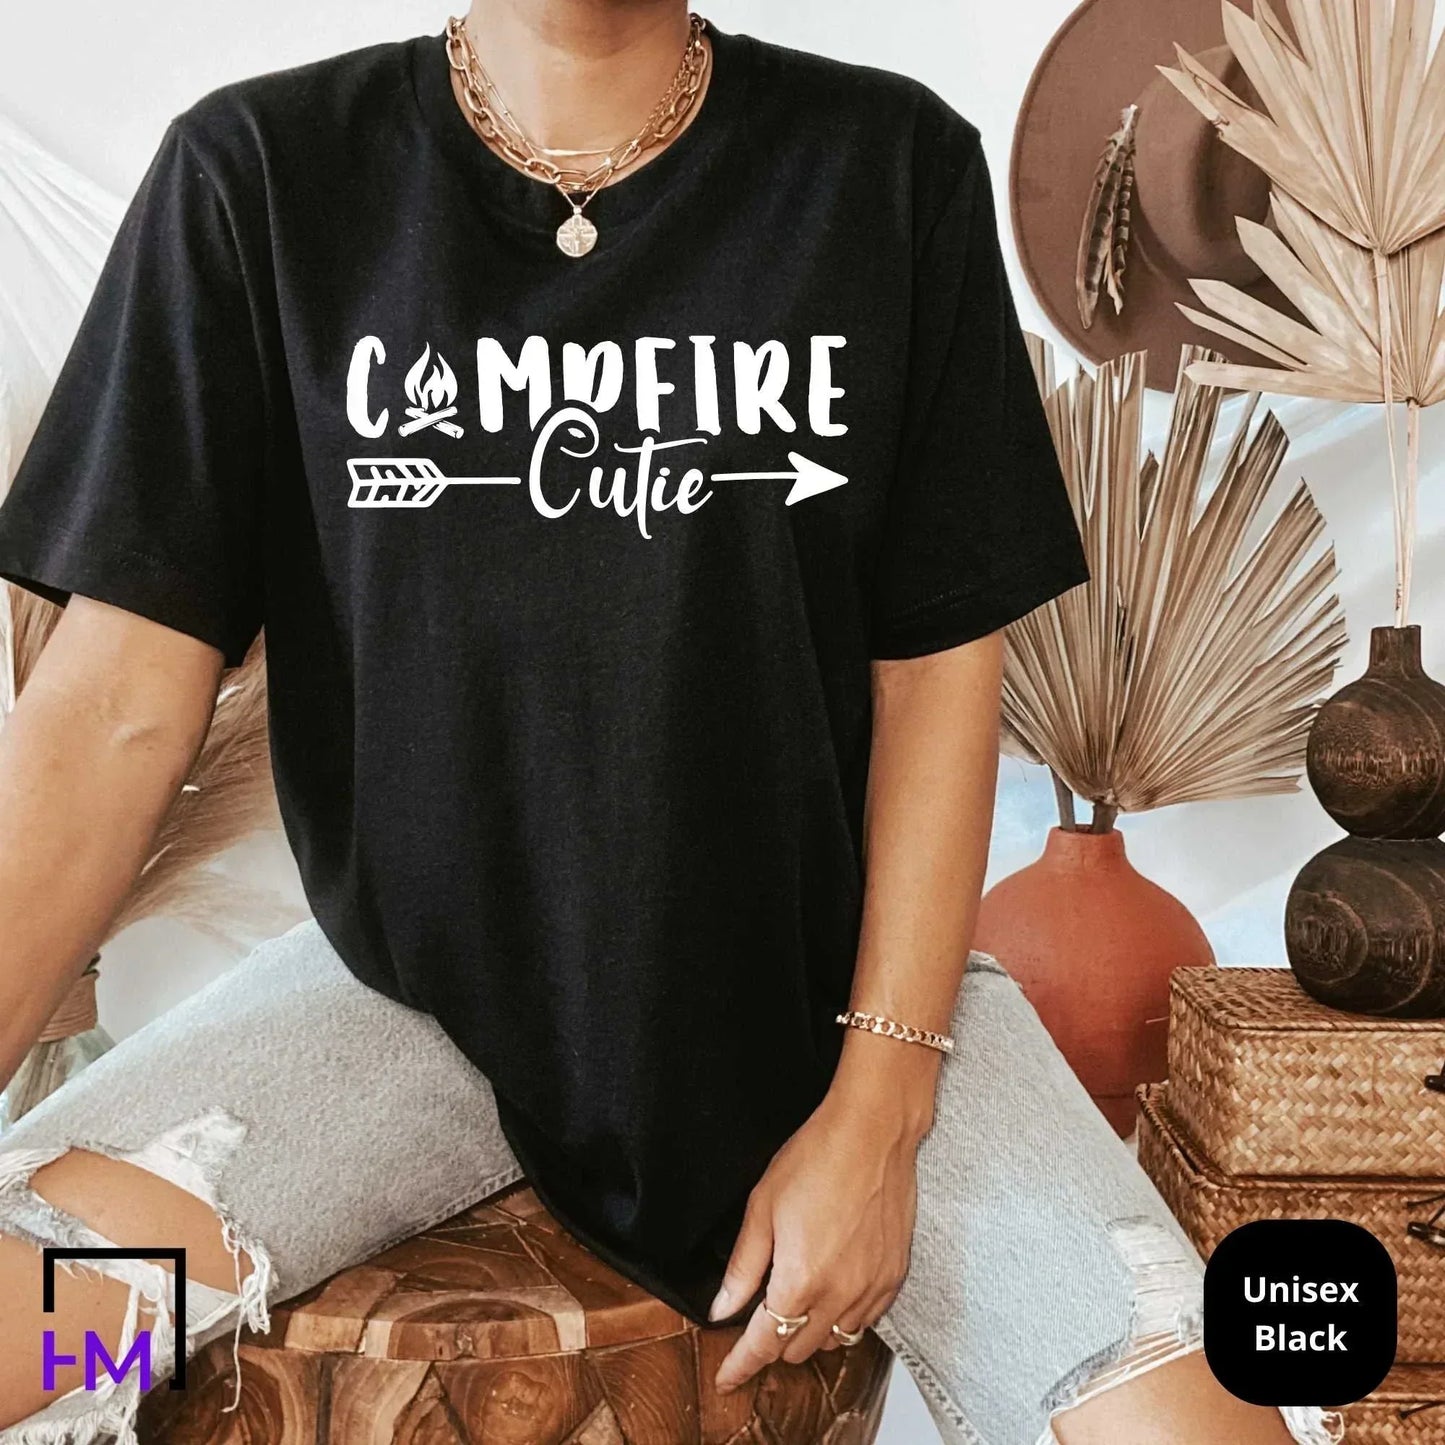 Campfire Cutie, Happy Camper Shirt, Adventure Time Gift, Camper Gifts for Women, Nature Lover Sweatshirt, Camping Presents, Hiking Tee